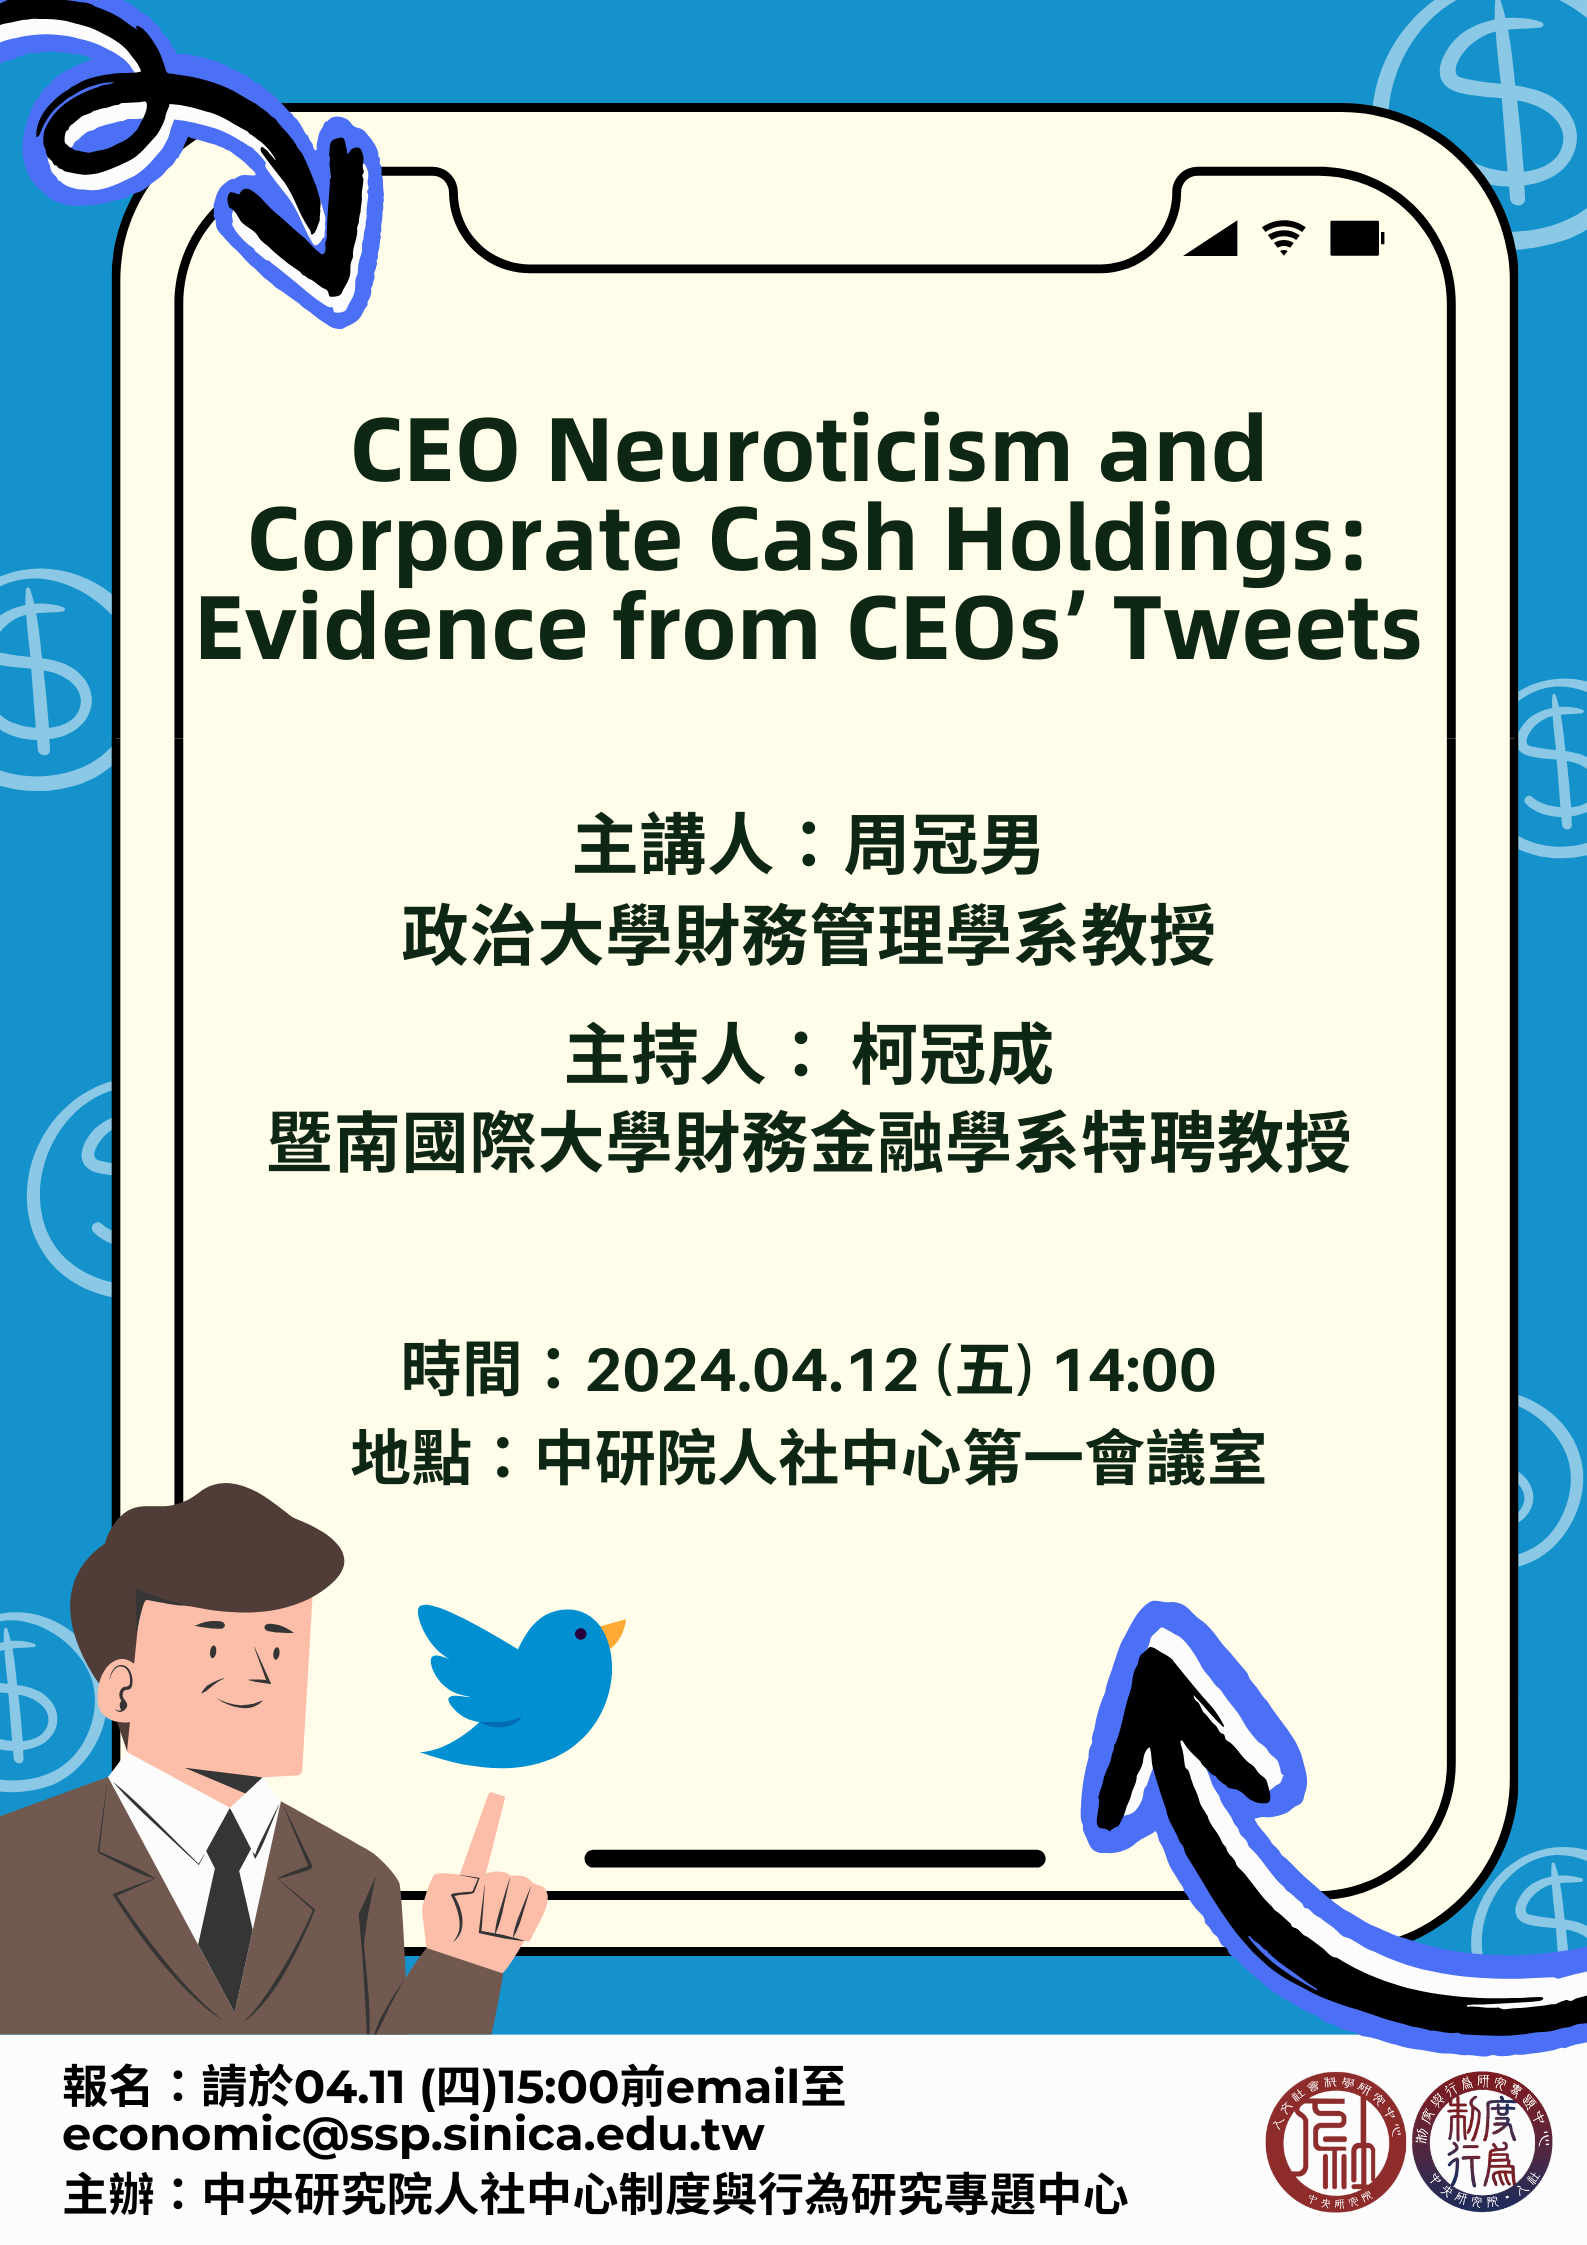 CEO_Neuroticism_and_Corporate_Cash_Holdings_Evidence_from_CEOs__Tweets.png